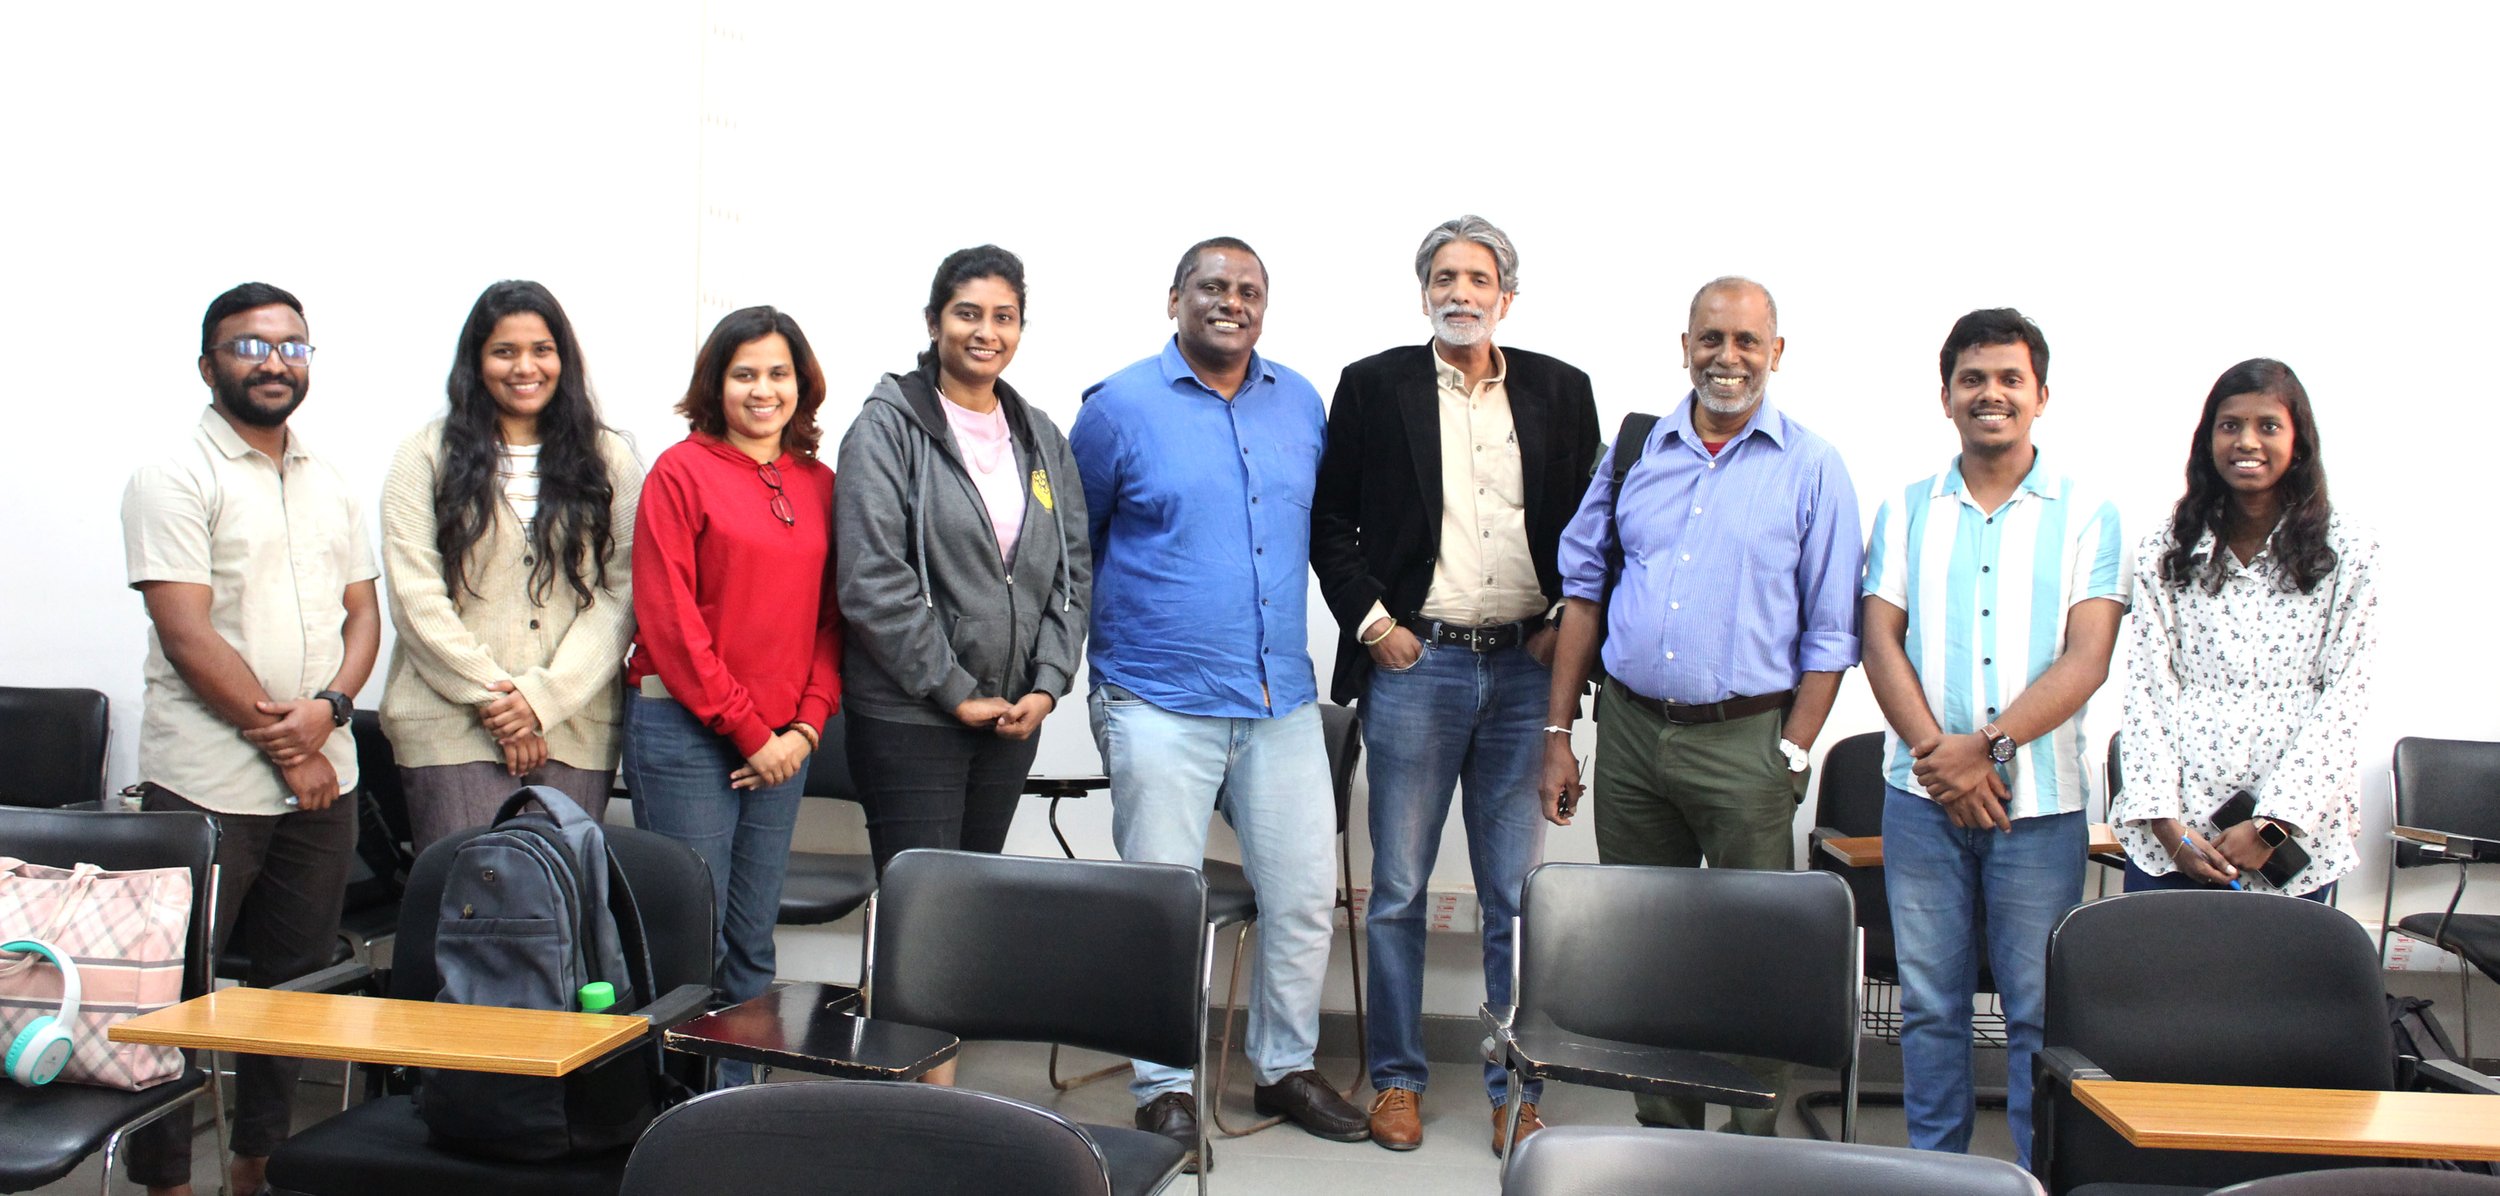 Prof. Nihal Perera (third from right) with organizer Prof. Sasanka Perera (fourth from right) with a group of lecture attendees.